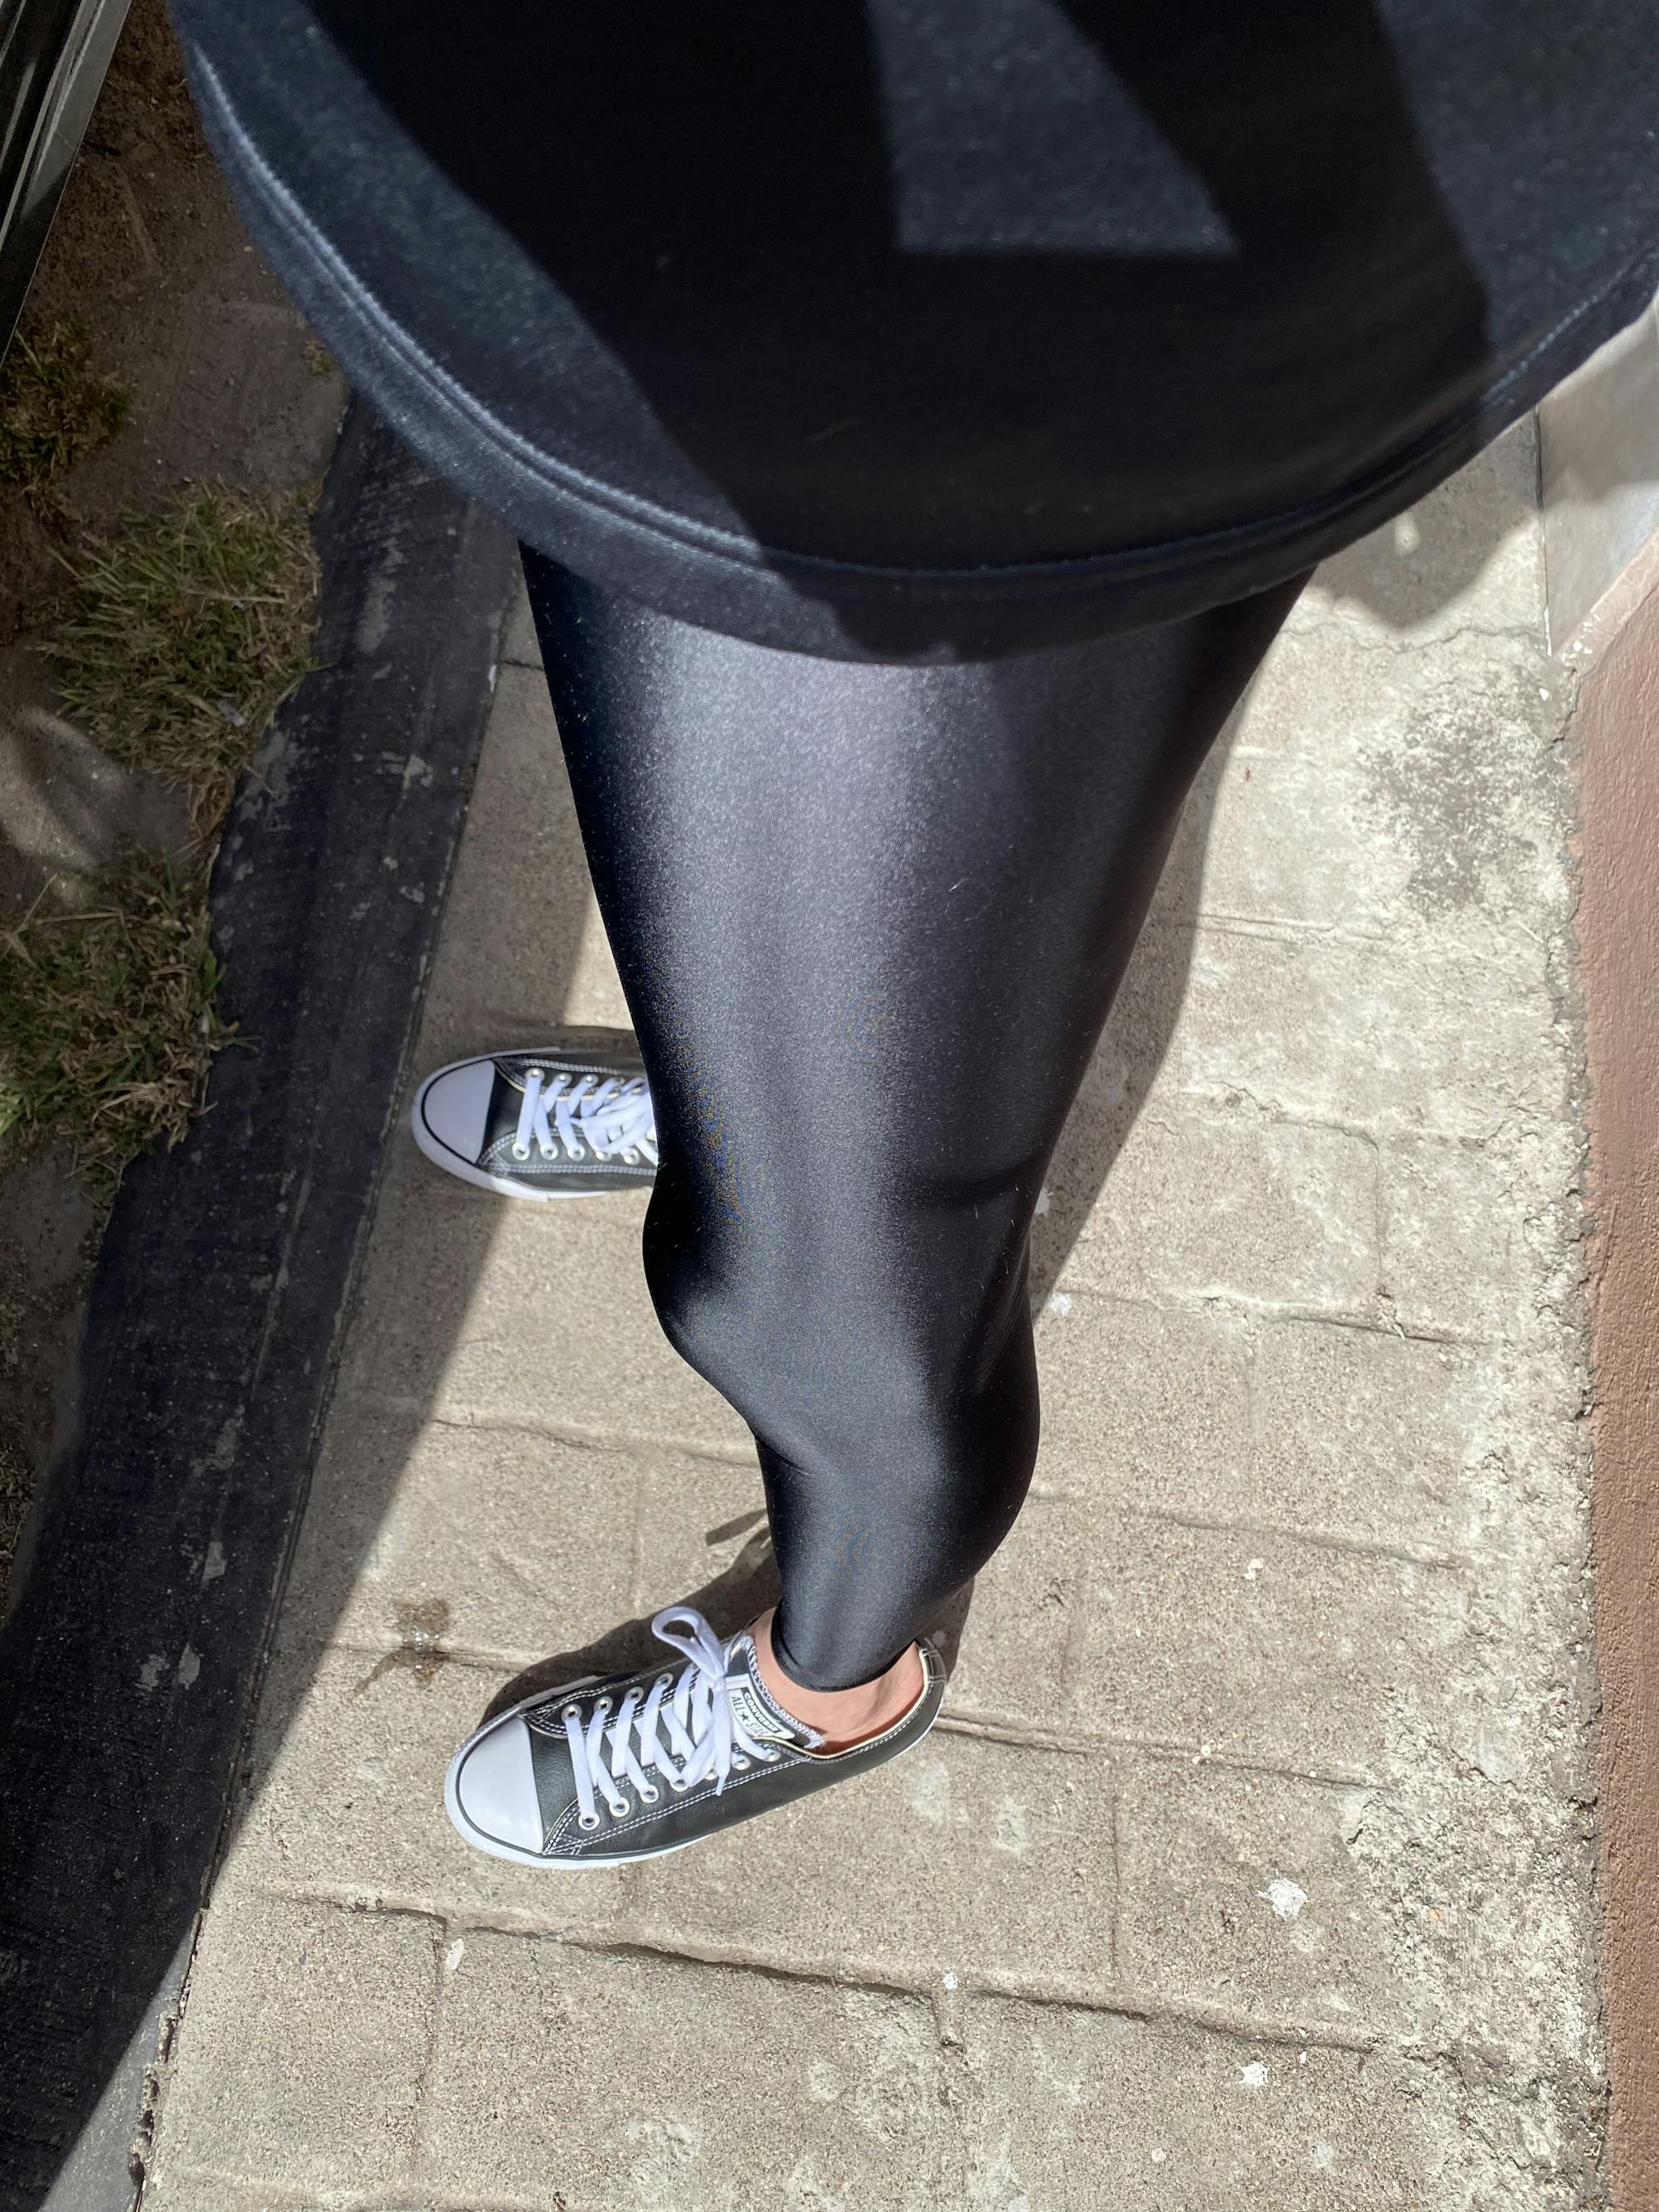 Mamatabushi - She's got legs! Spandex Leggings or Footed Tights? We've got  your legs covered at  . . . #leggings  #leggingsoftheday #leggingslover #spandexleggings #spandex #lycraleggings  #shinyleggings #skintight #80sworkout